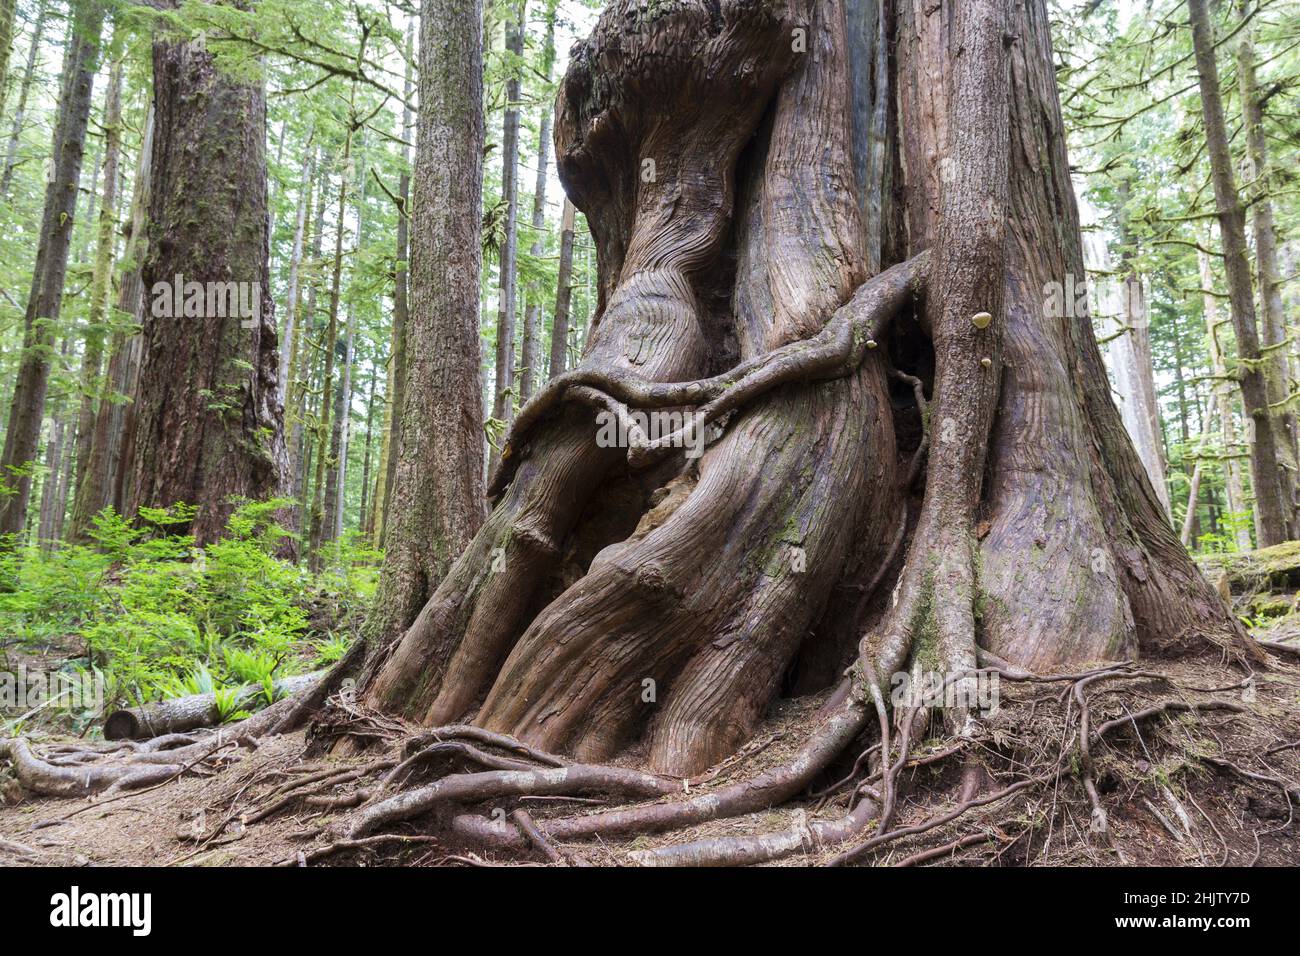 Gnarly Trunk Massive Giant Western Red Cedar Forest Tree. Avatar Groove near Port Renfrew, Pacific Northwest Vancouver Island British Columbia Canada Stock Photo